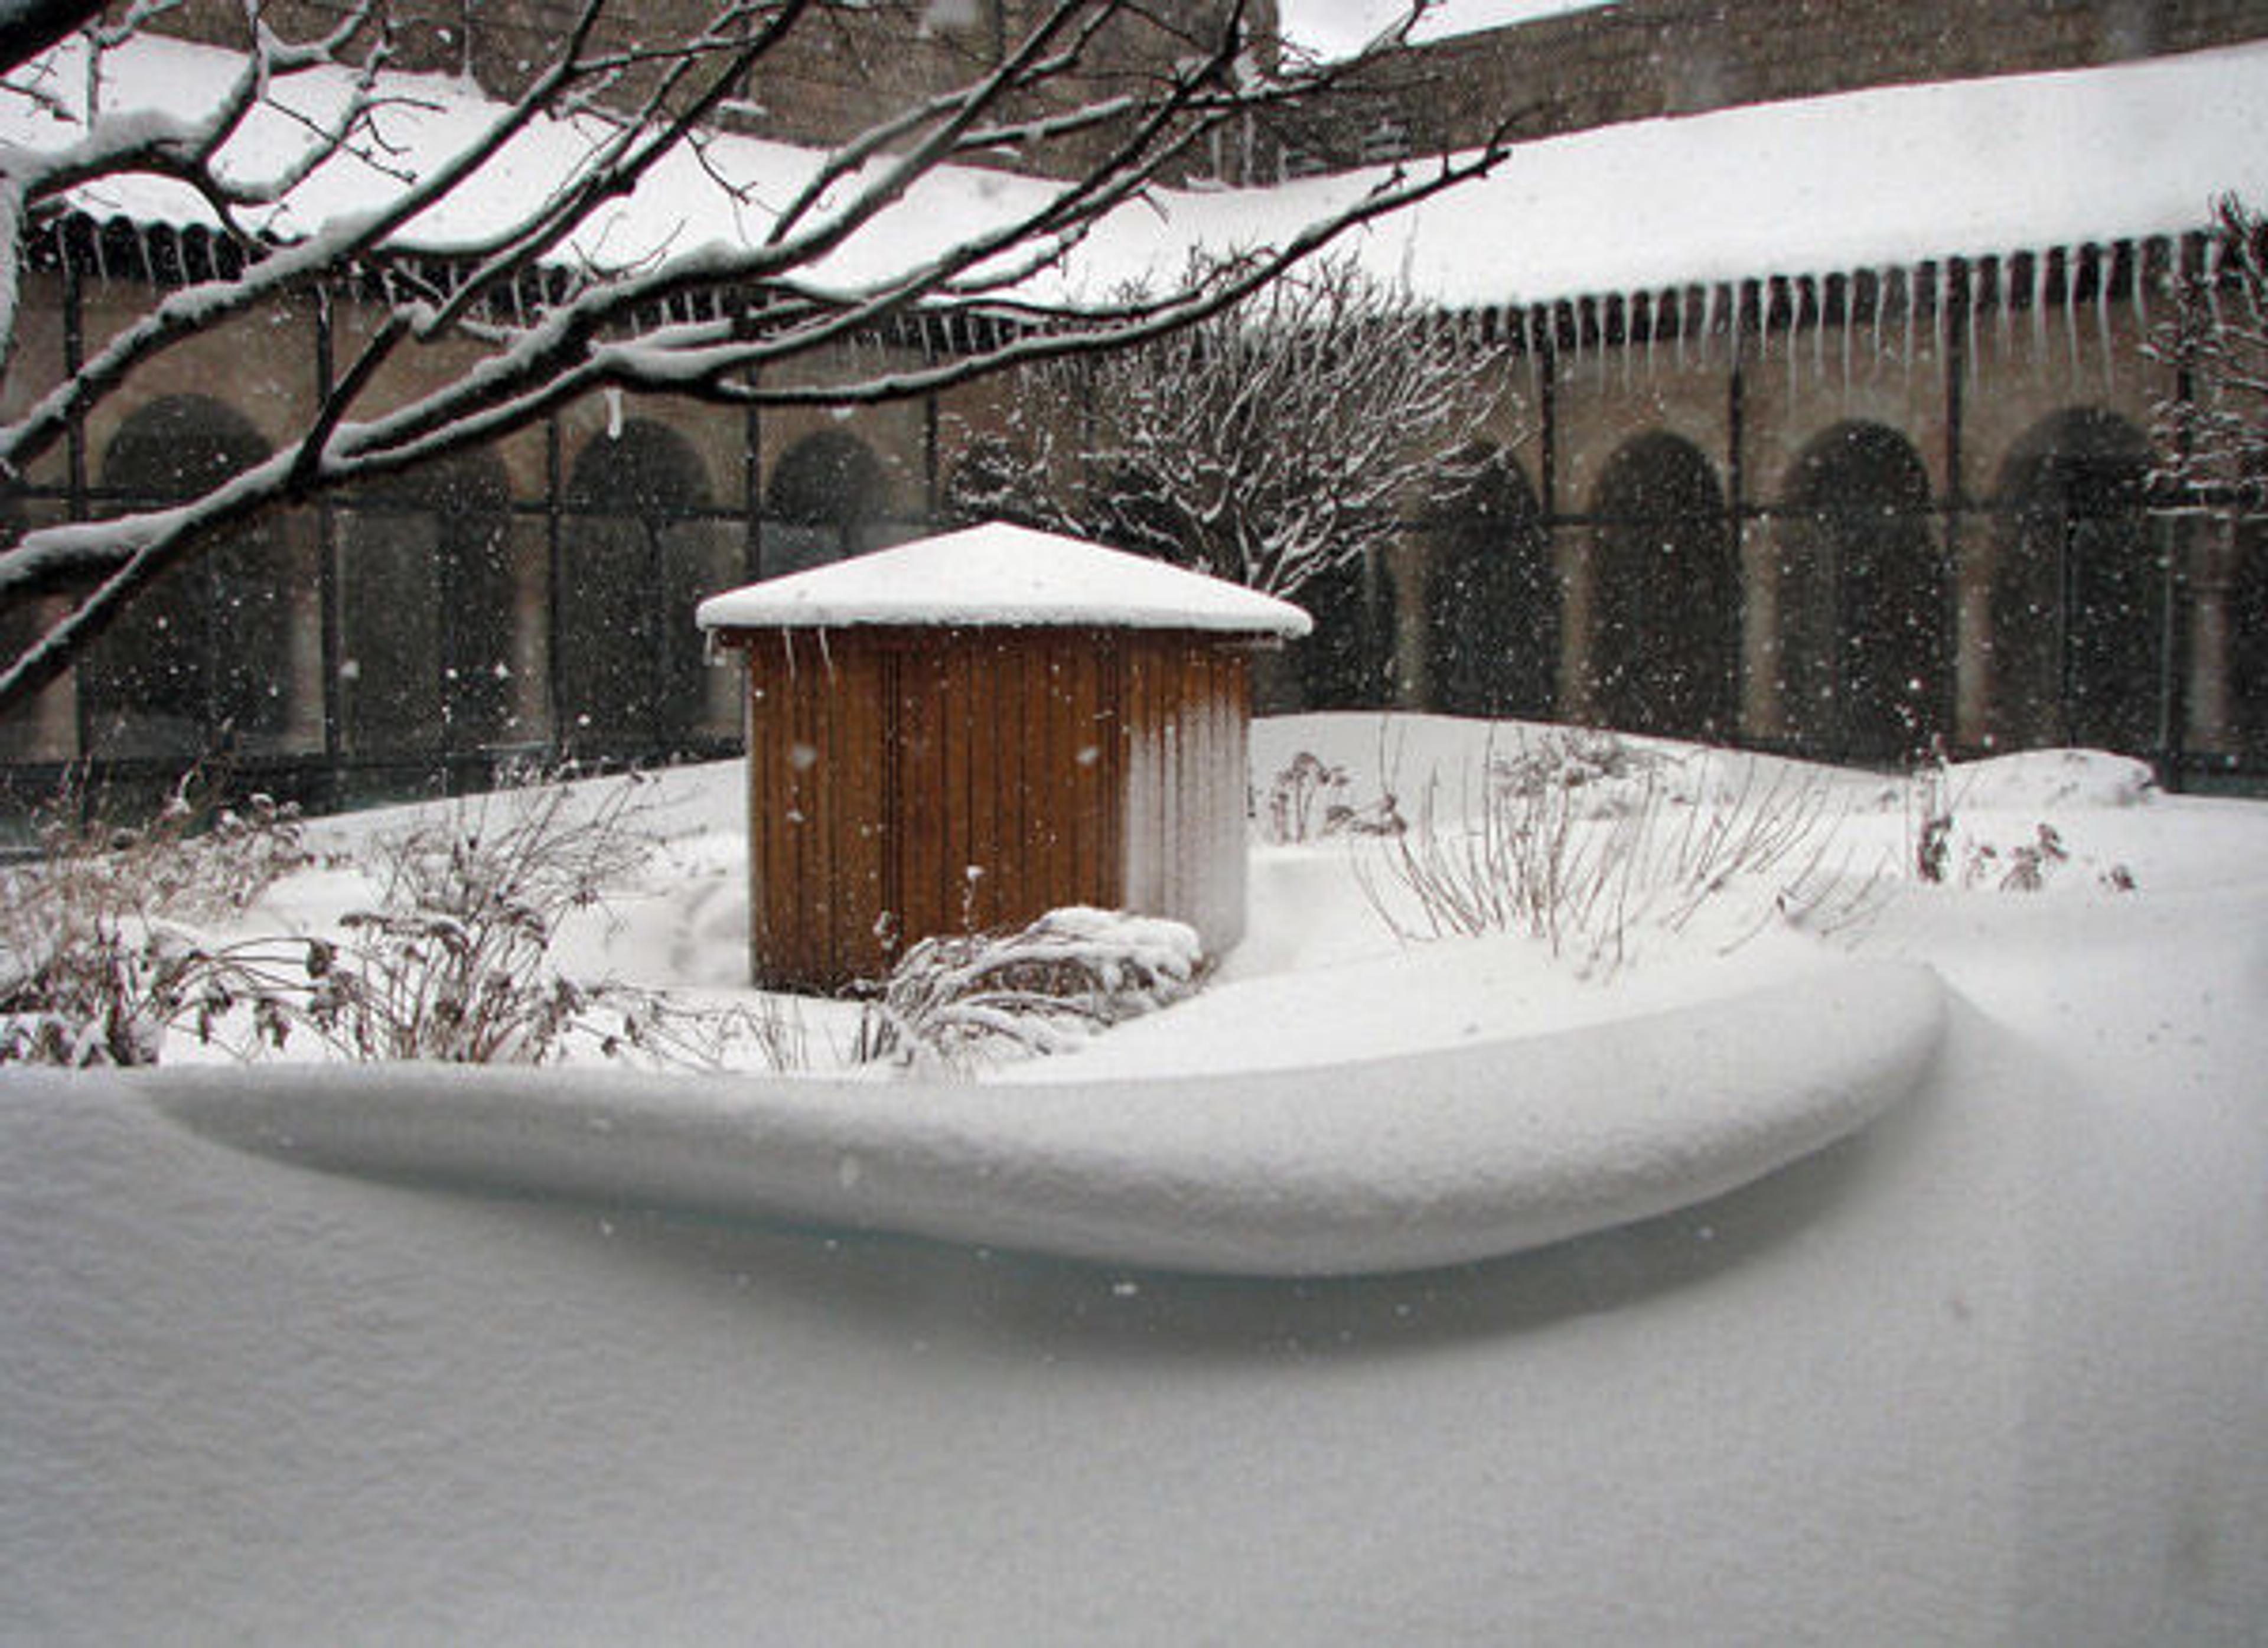 The snow formations of the Cuxa Cloister